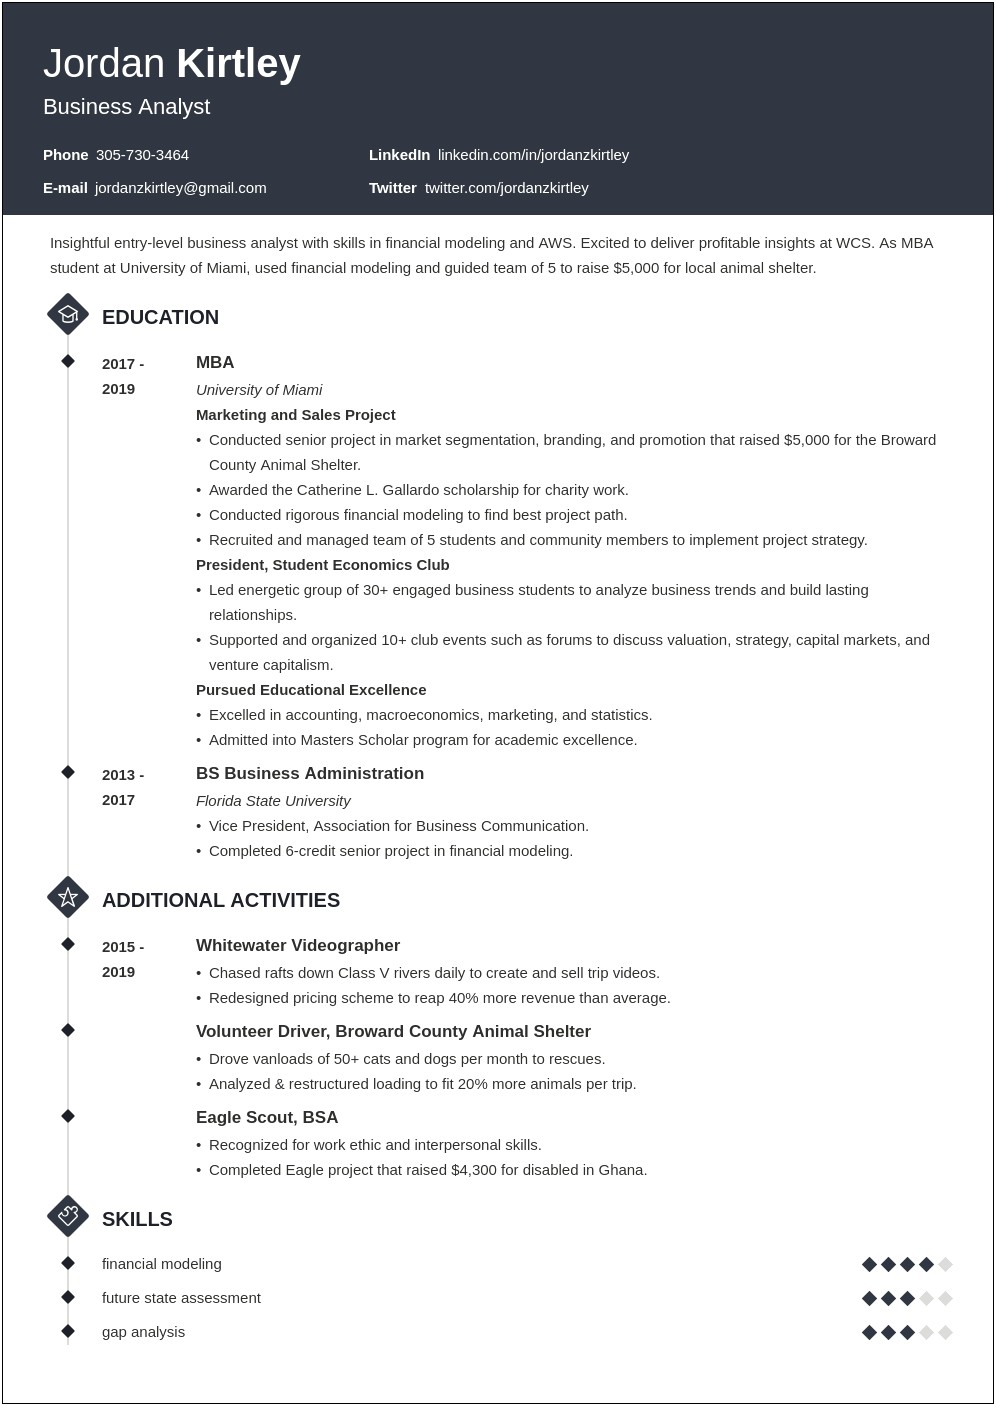 Business Analyst With Gap Analysis Experience Sample Resume